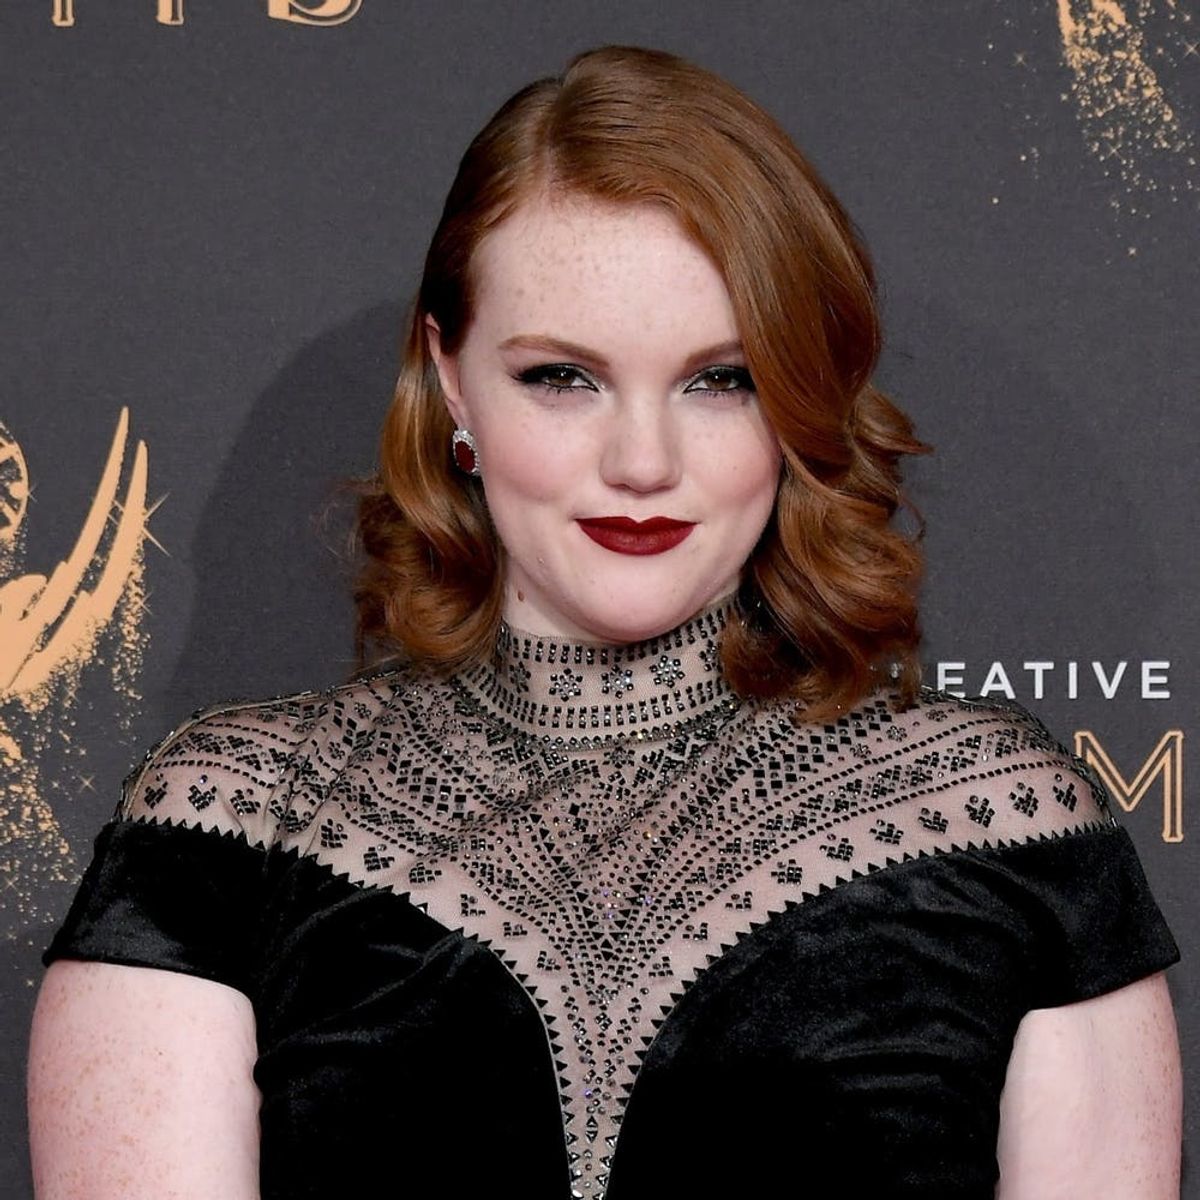 ‘Stranger Things’ Star Shannon Purser Got an Unexpected Barb Shout-Out from Her Starbucks Barista